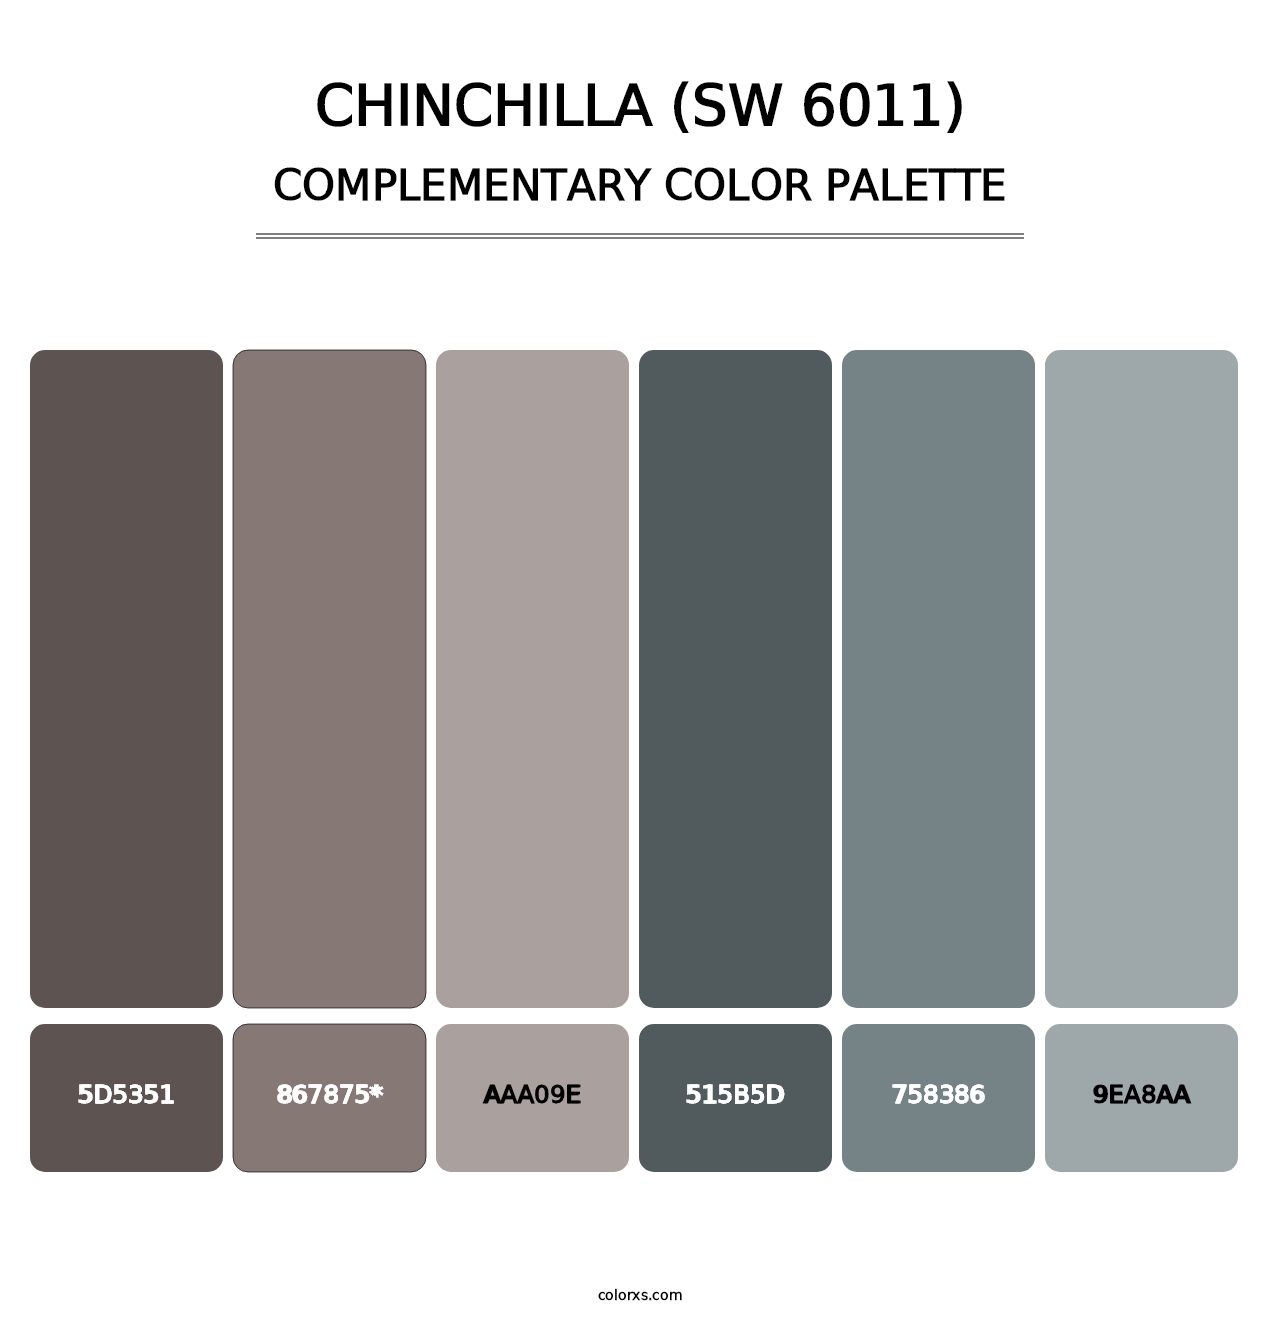 Chinchilla (SW 6011) - Complementary Color Palette